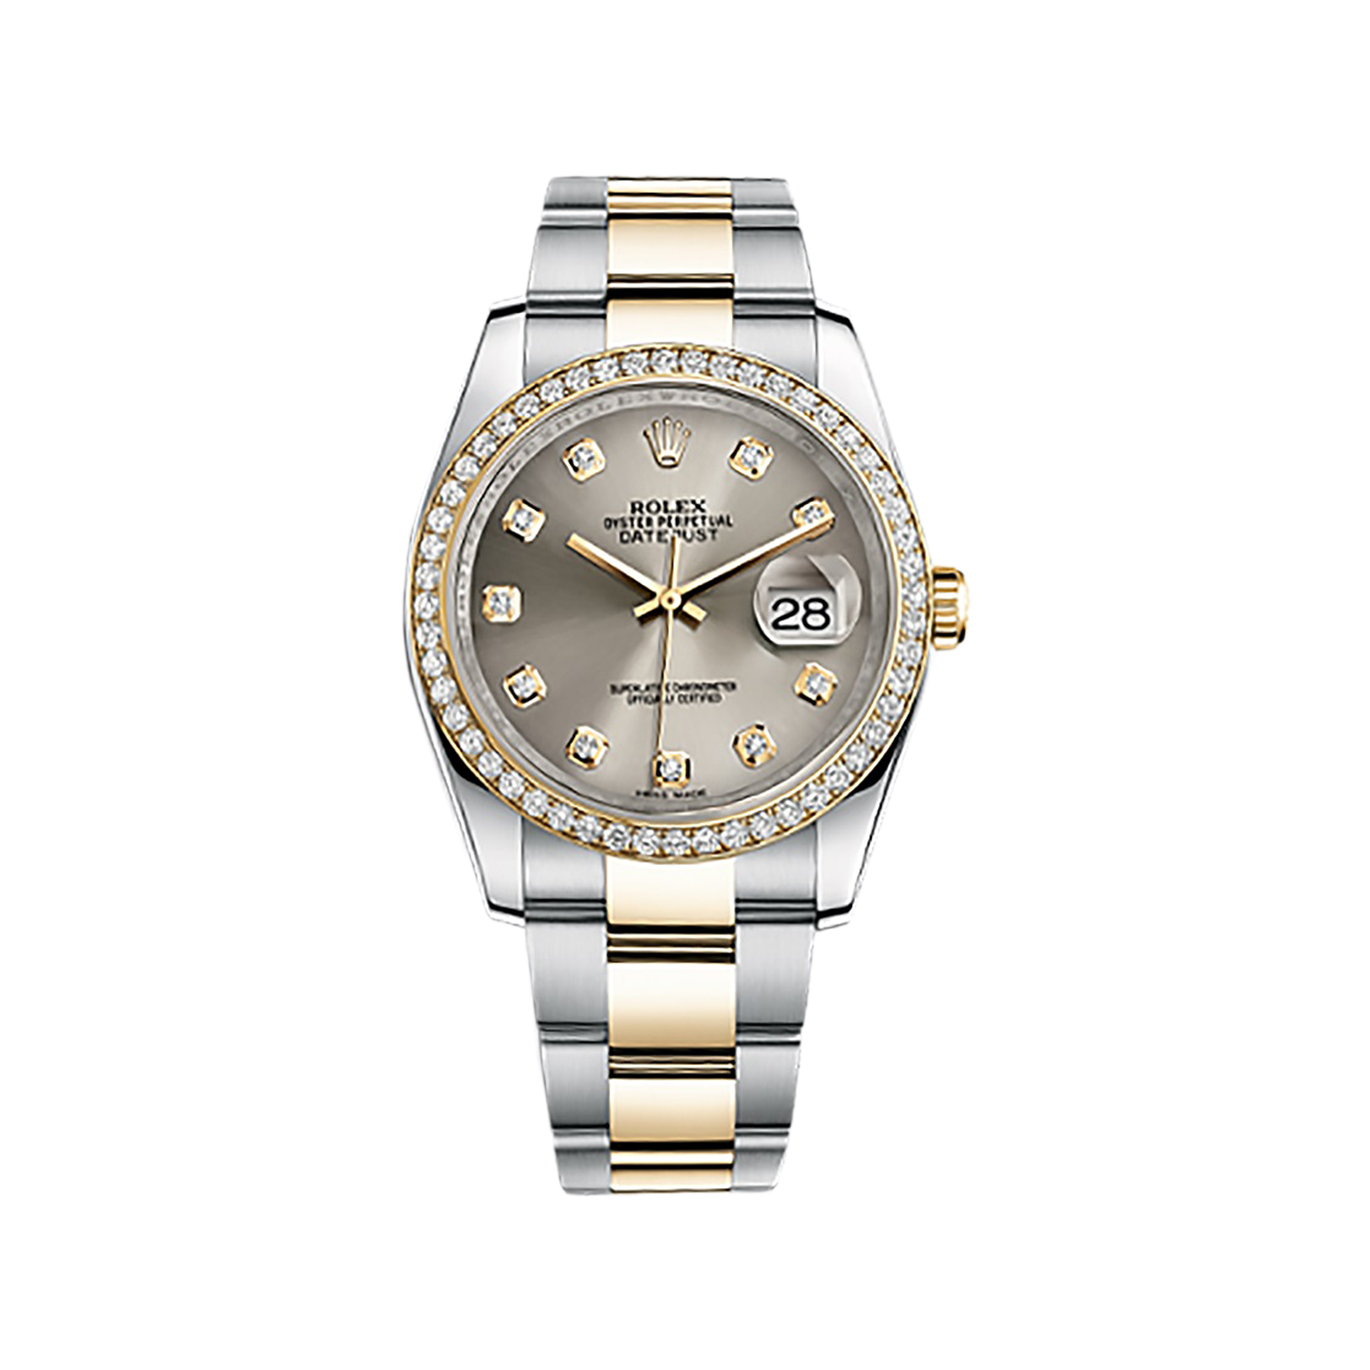 Datejust 36 116243 Gold & Stainless Steel Watch (Steel Set with Diamonds) - Click Image to Close